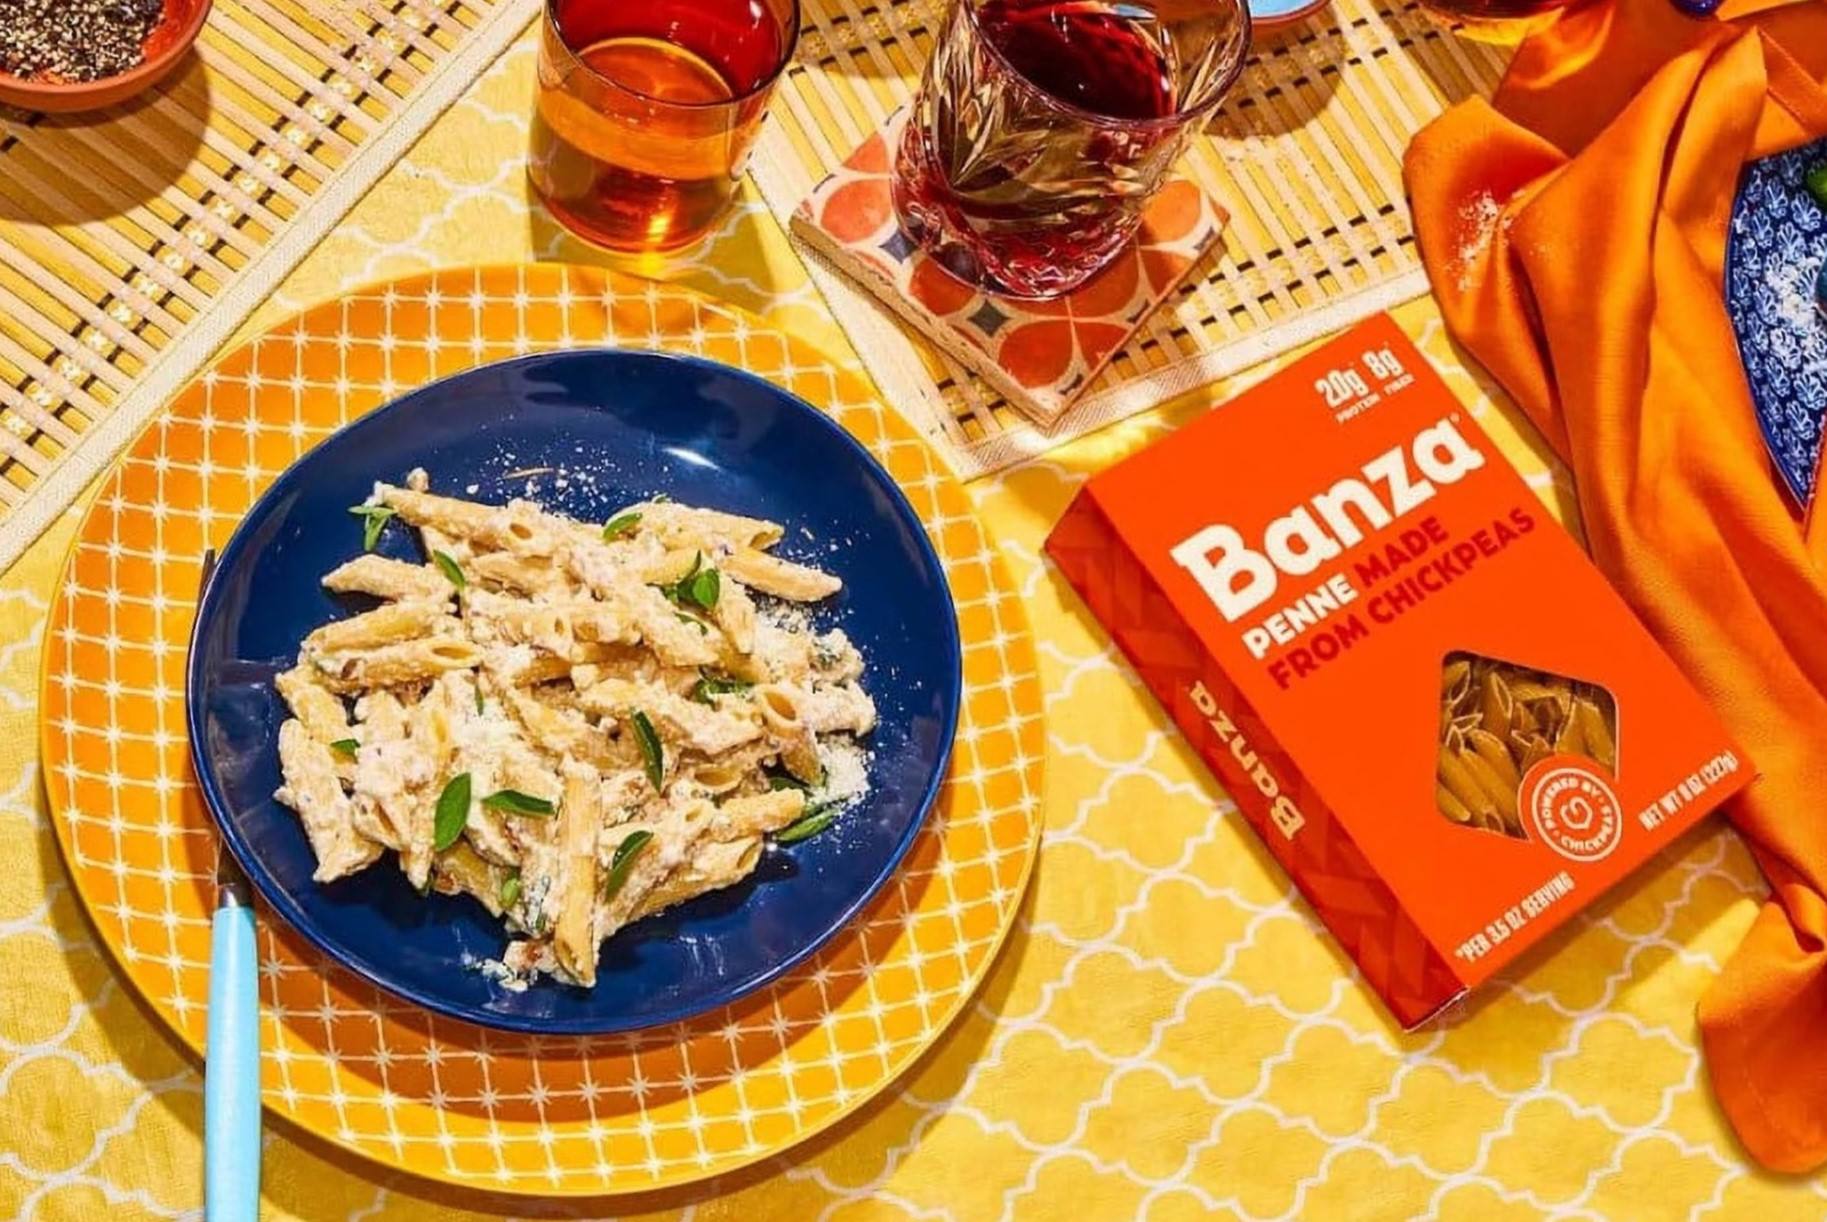 20 Banza Penne Nutrition Facts - Facts.net